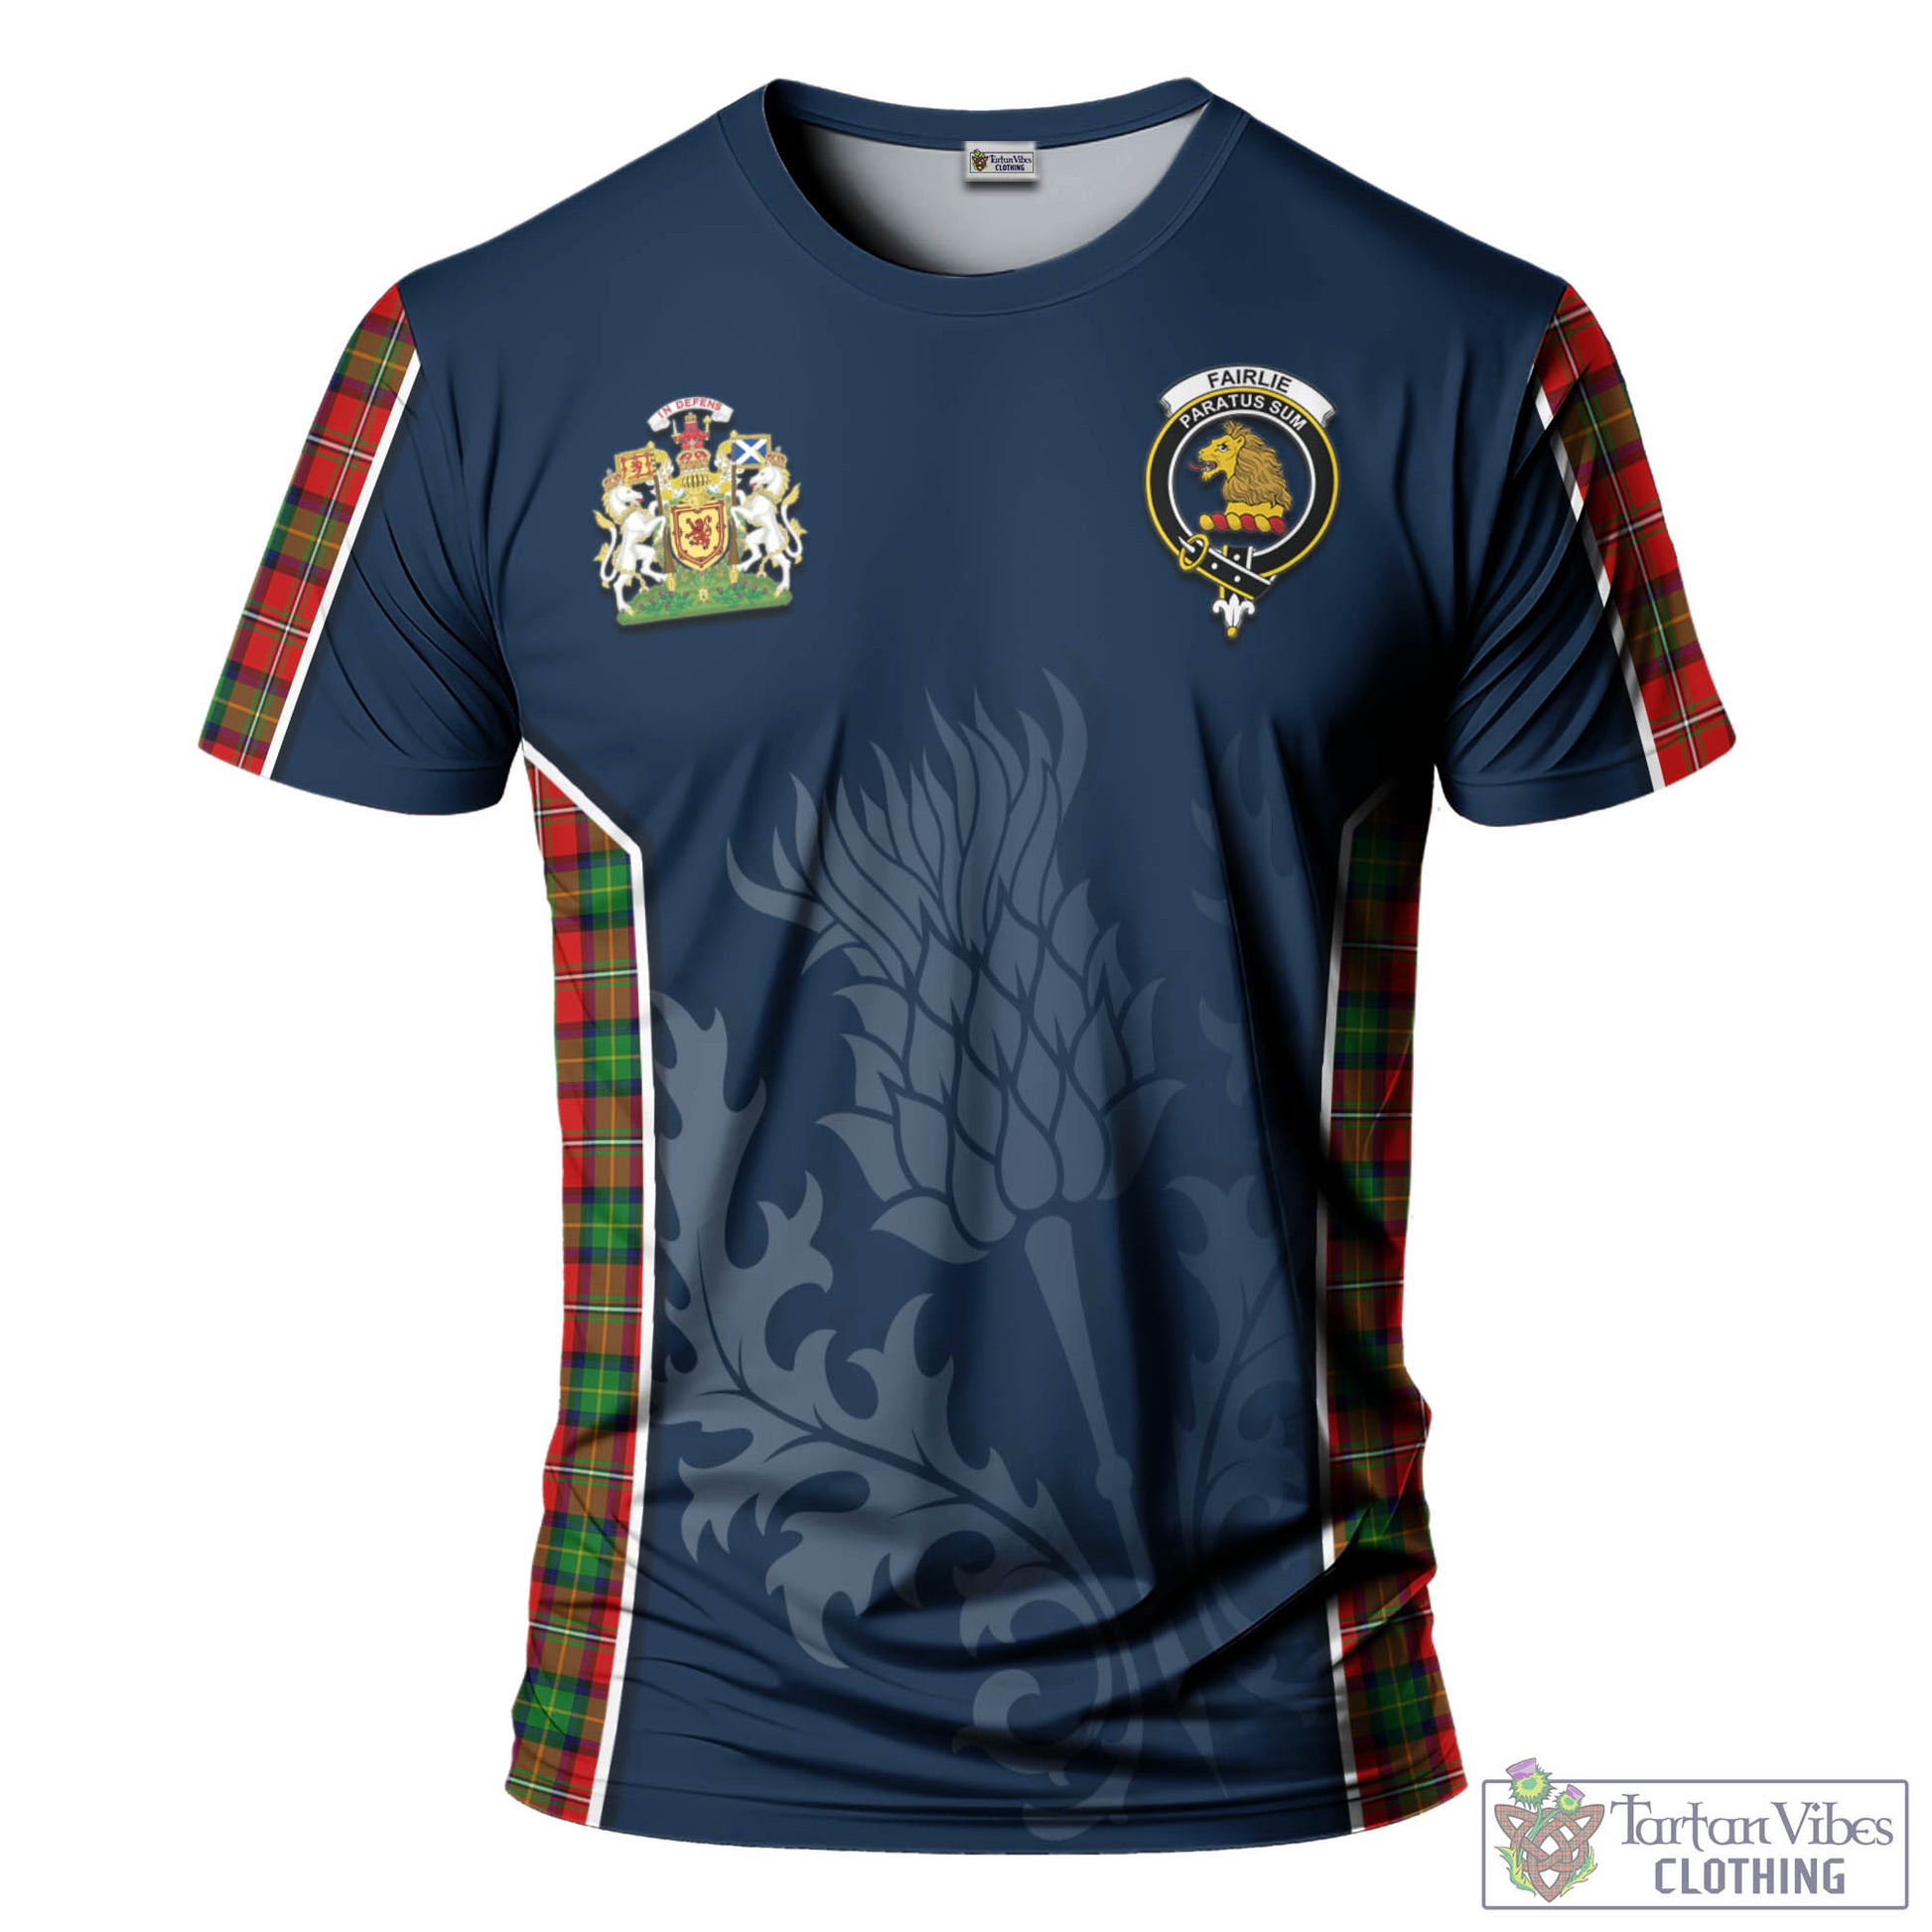 Tartan Vibes Clothing Fairlie Modern Tartan T-Shirt with Family Crest and Scottish Thistle Vibes Sport Style